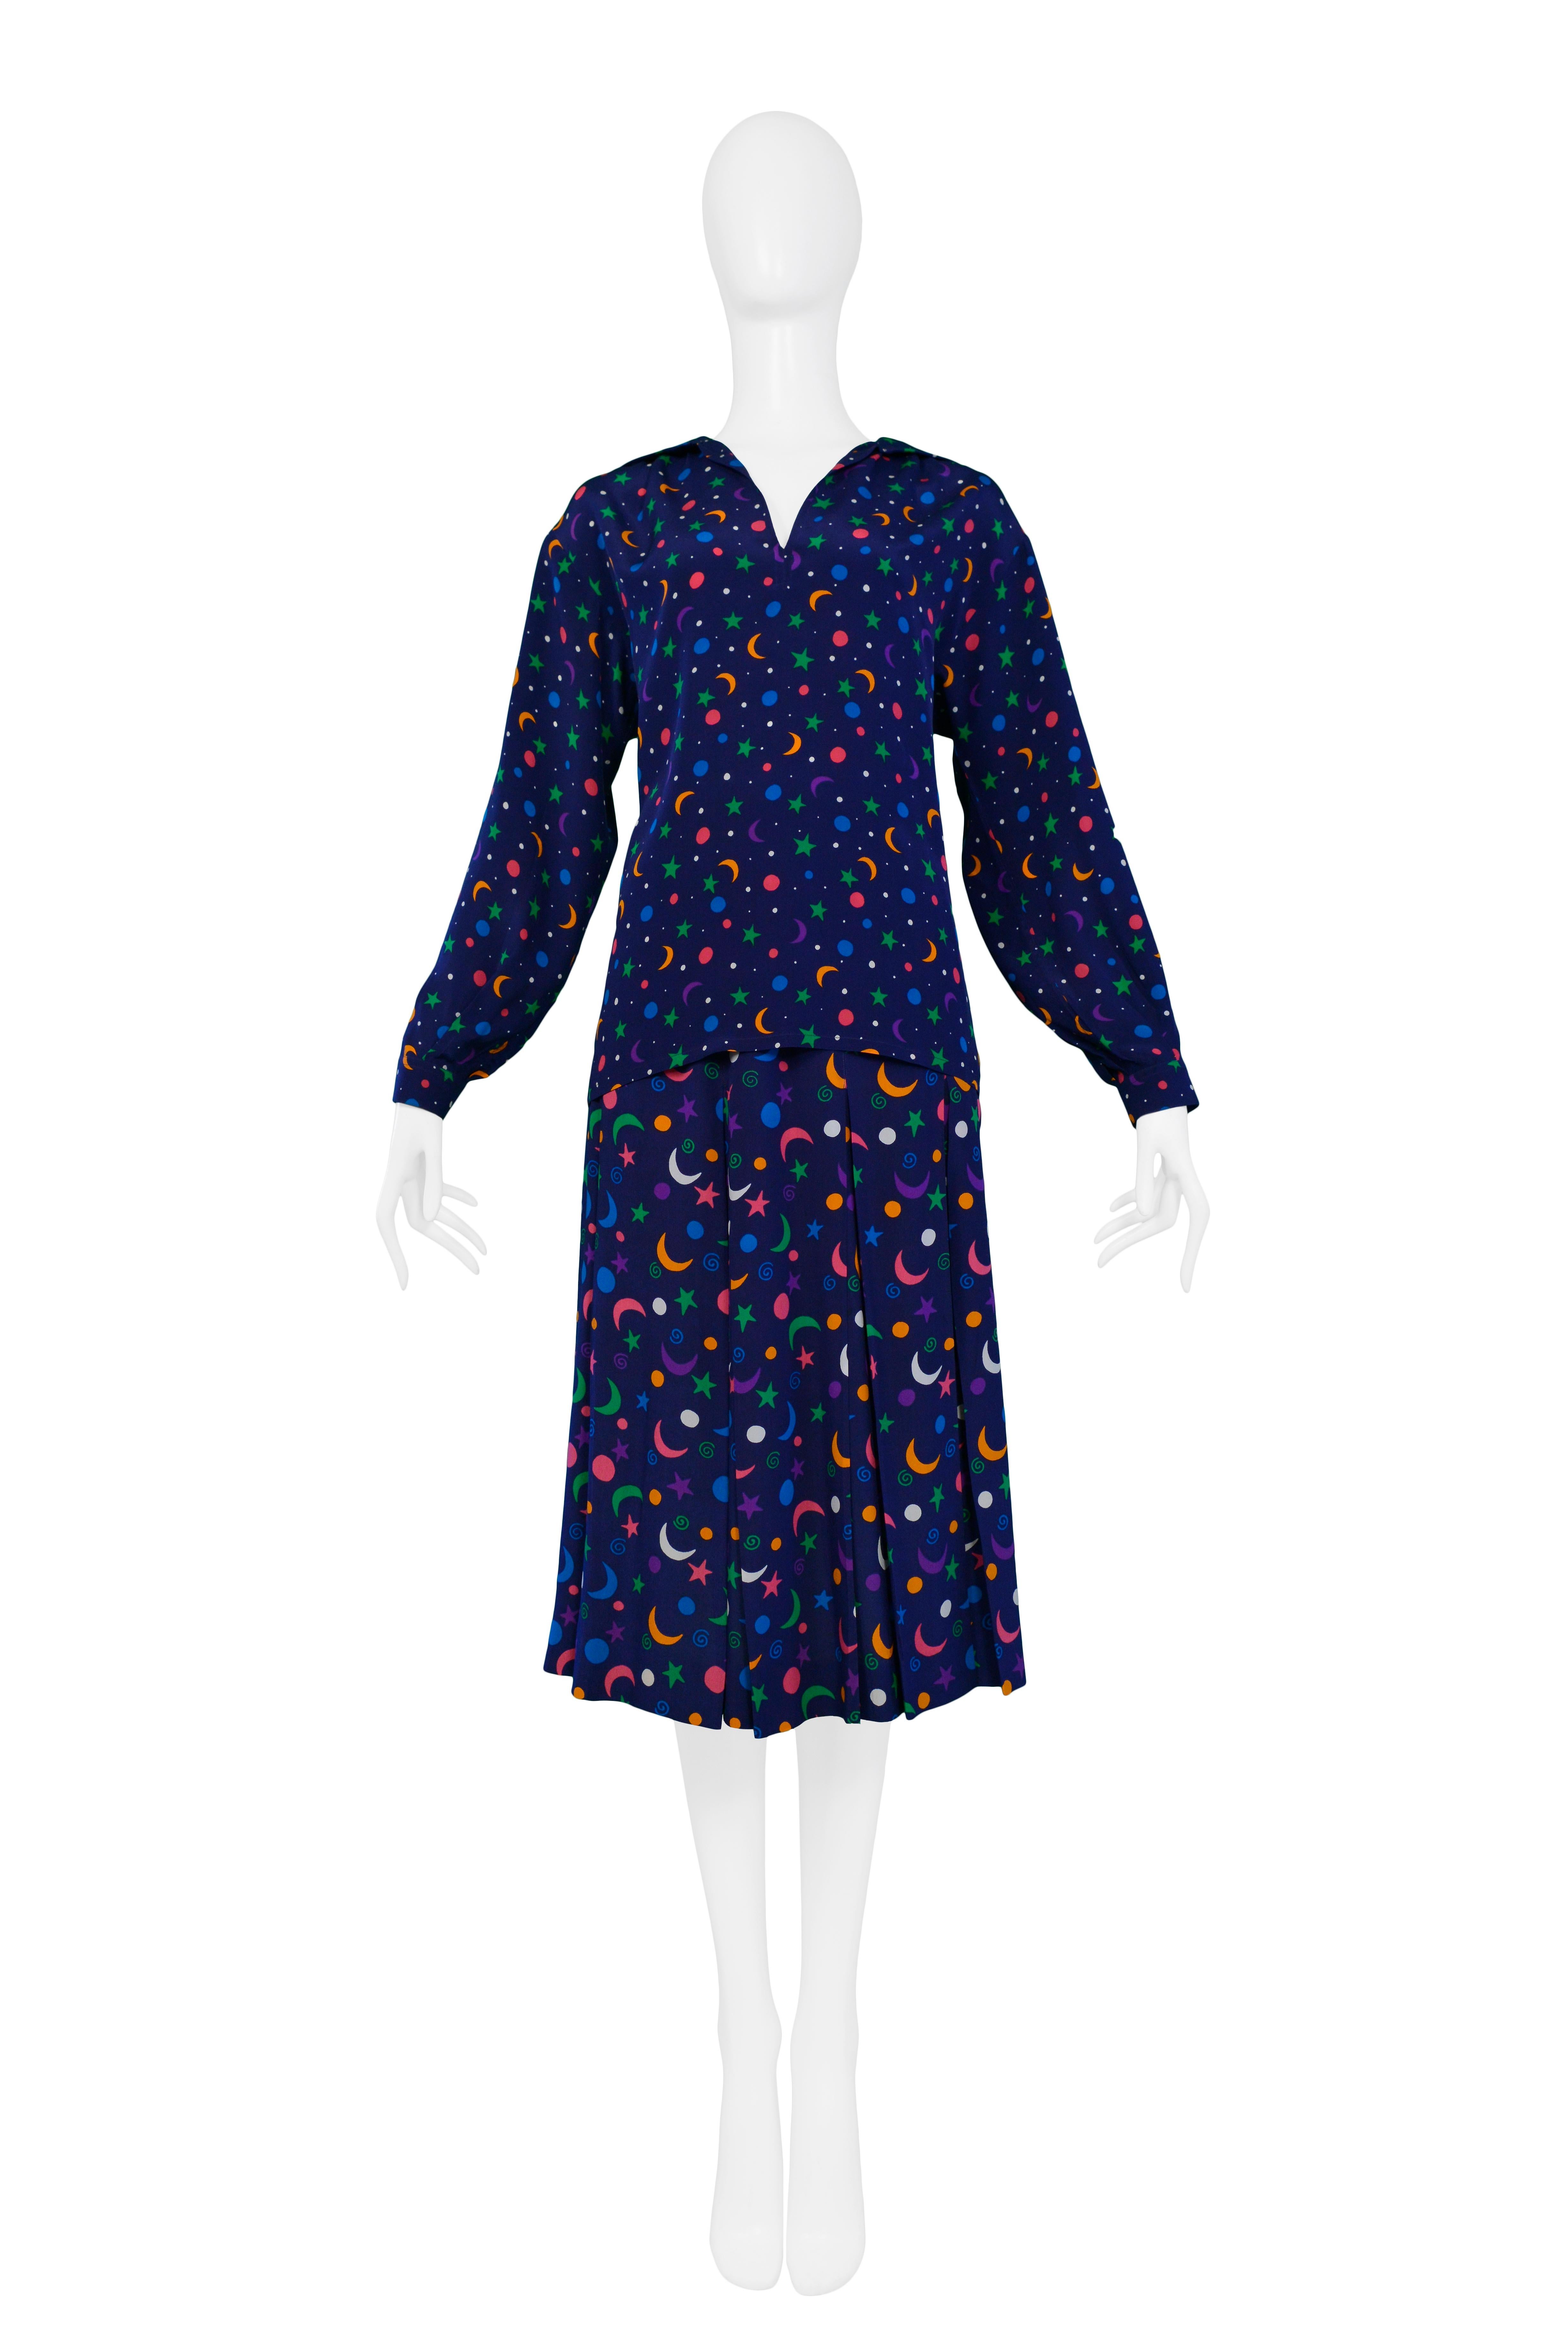 Vintage Yves Saint Laurent royal blue blouse and skirt ensemble with famous multi-color moon & star print. The set features a long sleeve open neck blouse and a matching pleated skirt. 

Excellent Condition. 

Size: TOP: 36, SKIRT: 34

